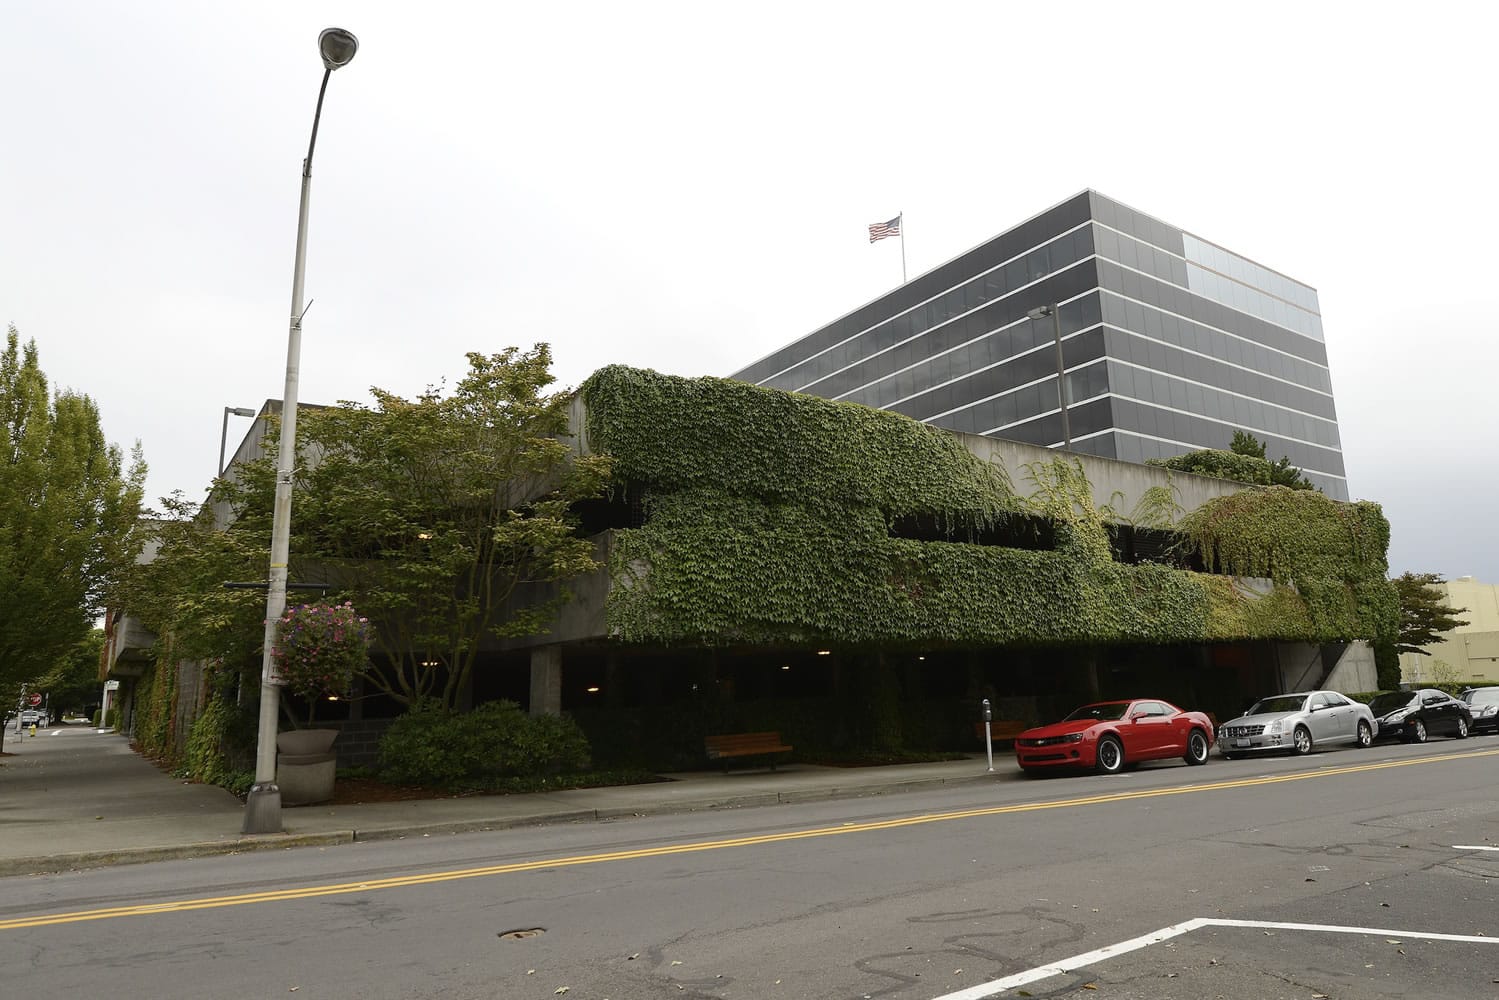 The Vancouver City Council on Monday approved the sale of the Main Place Garage, 1111 Main St., to Main Place of Vancouver for $1.26 million.